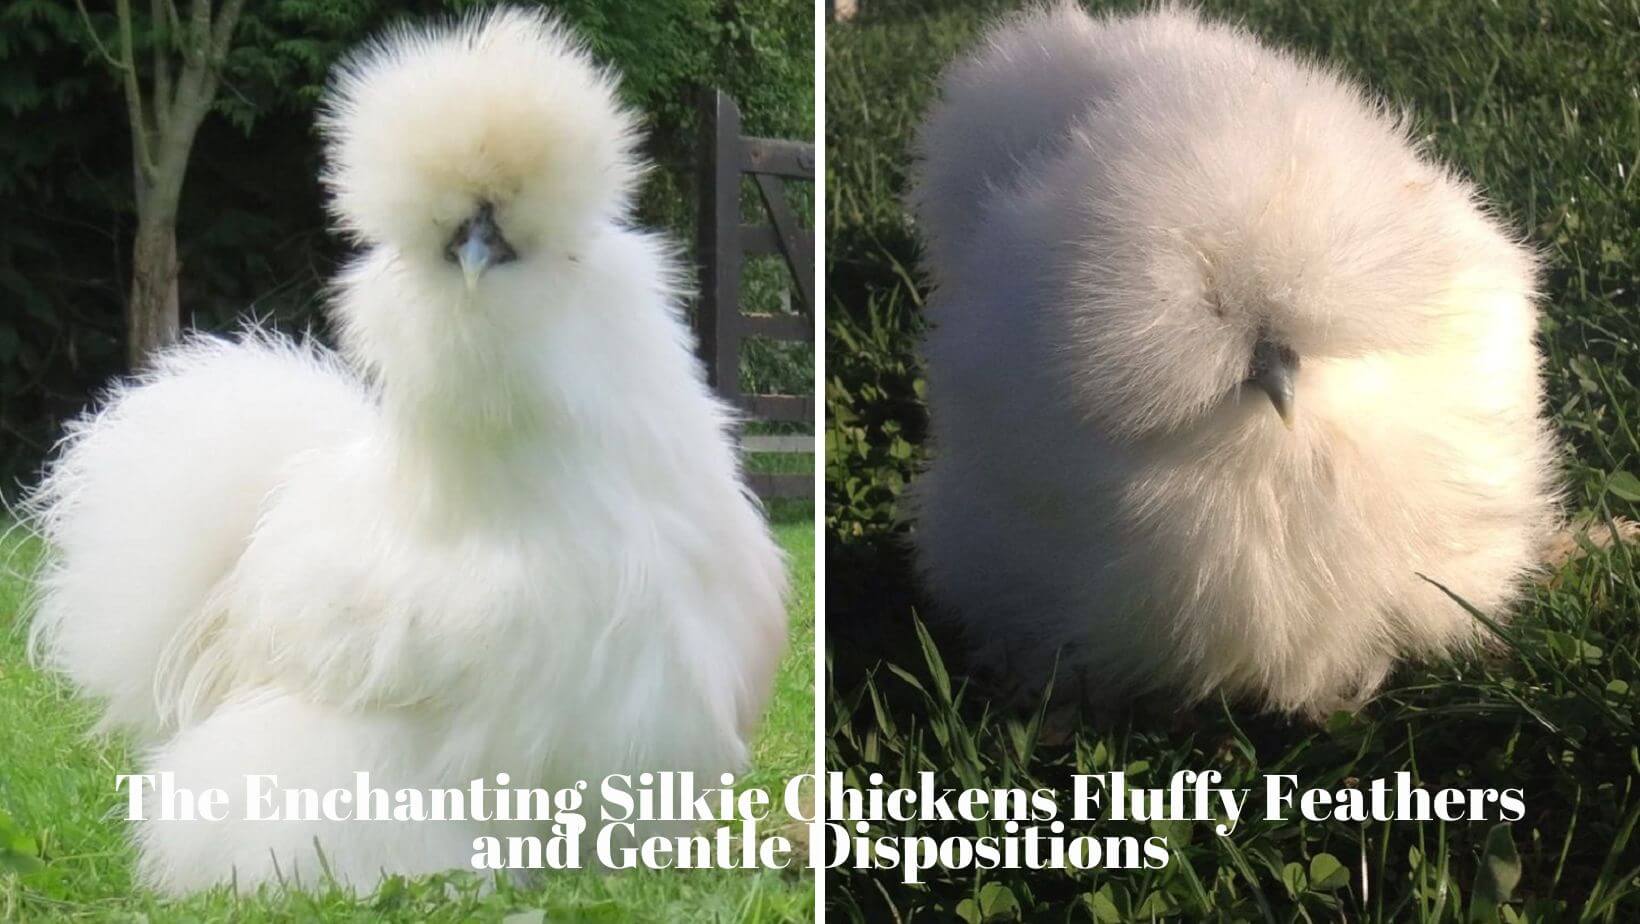 The Enchanting Silkie Chickens Fluffy Feathers and Gentle Dispositions